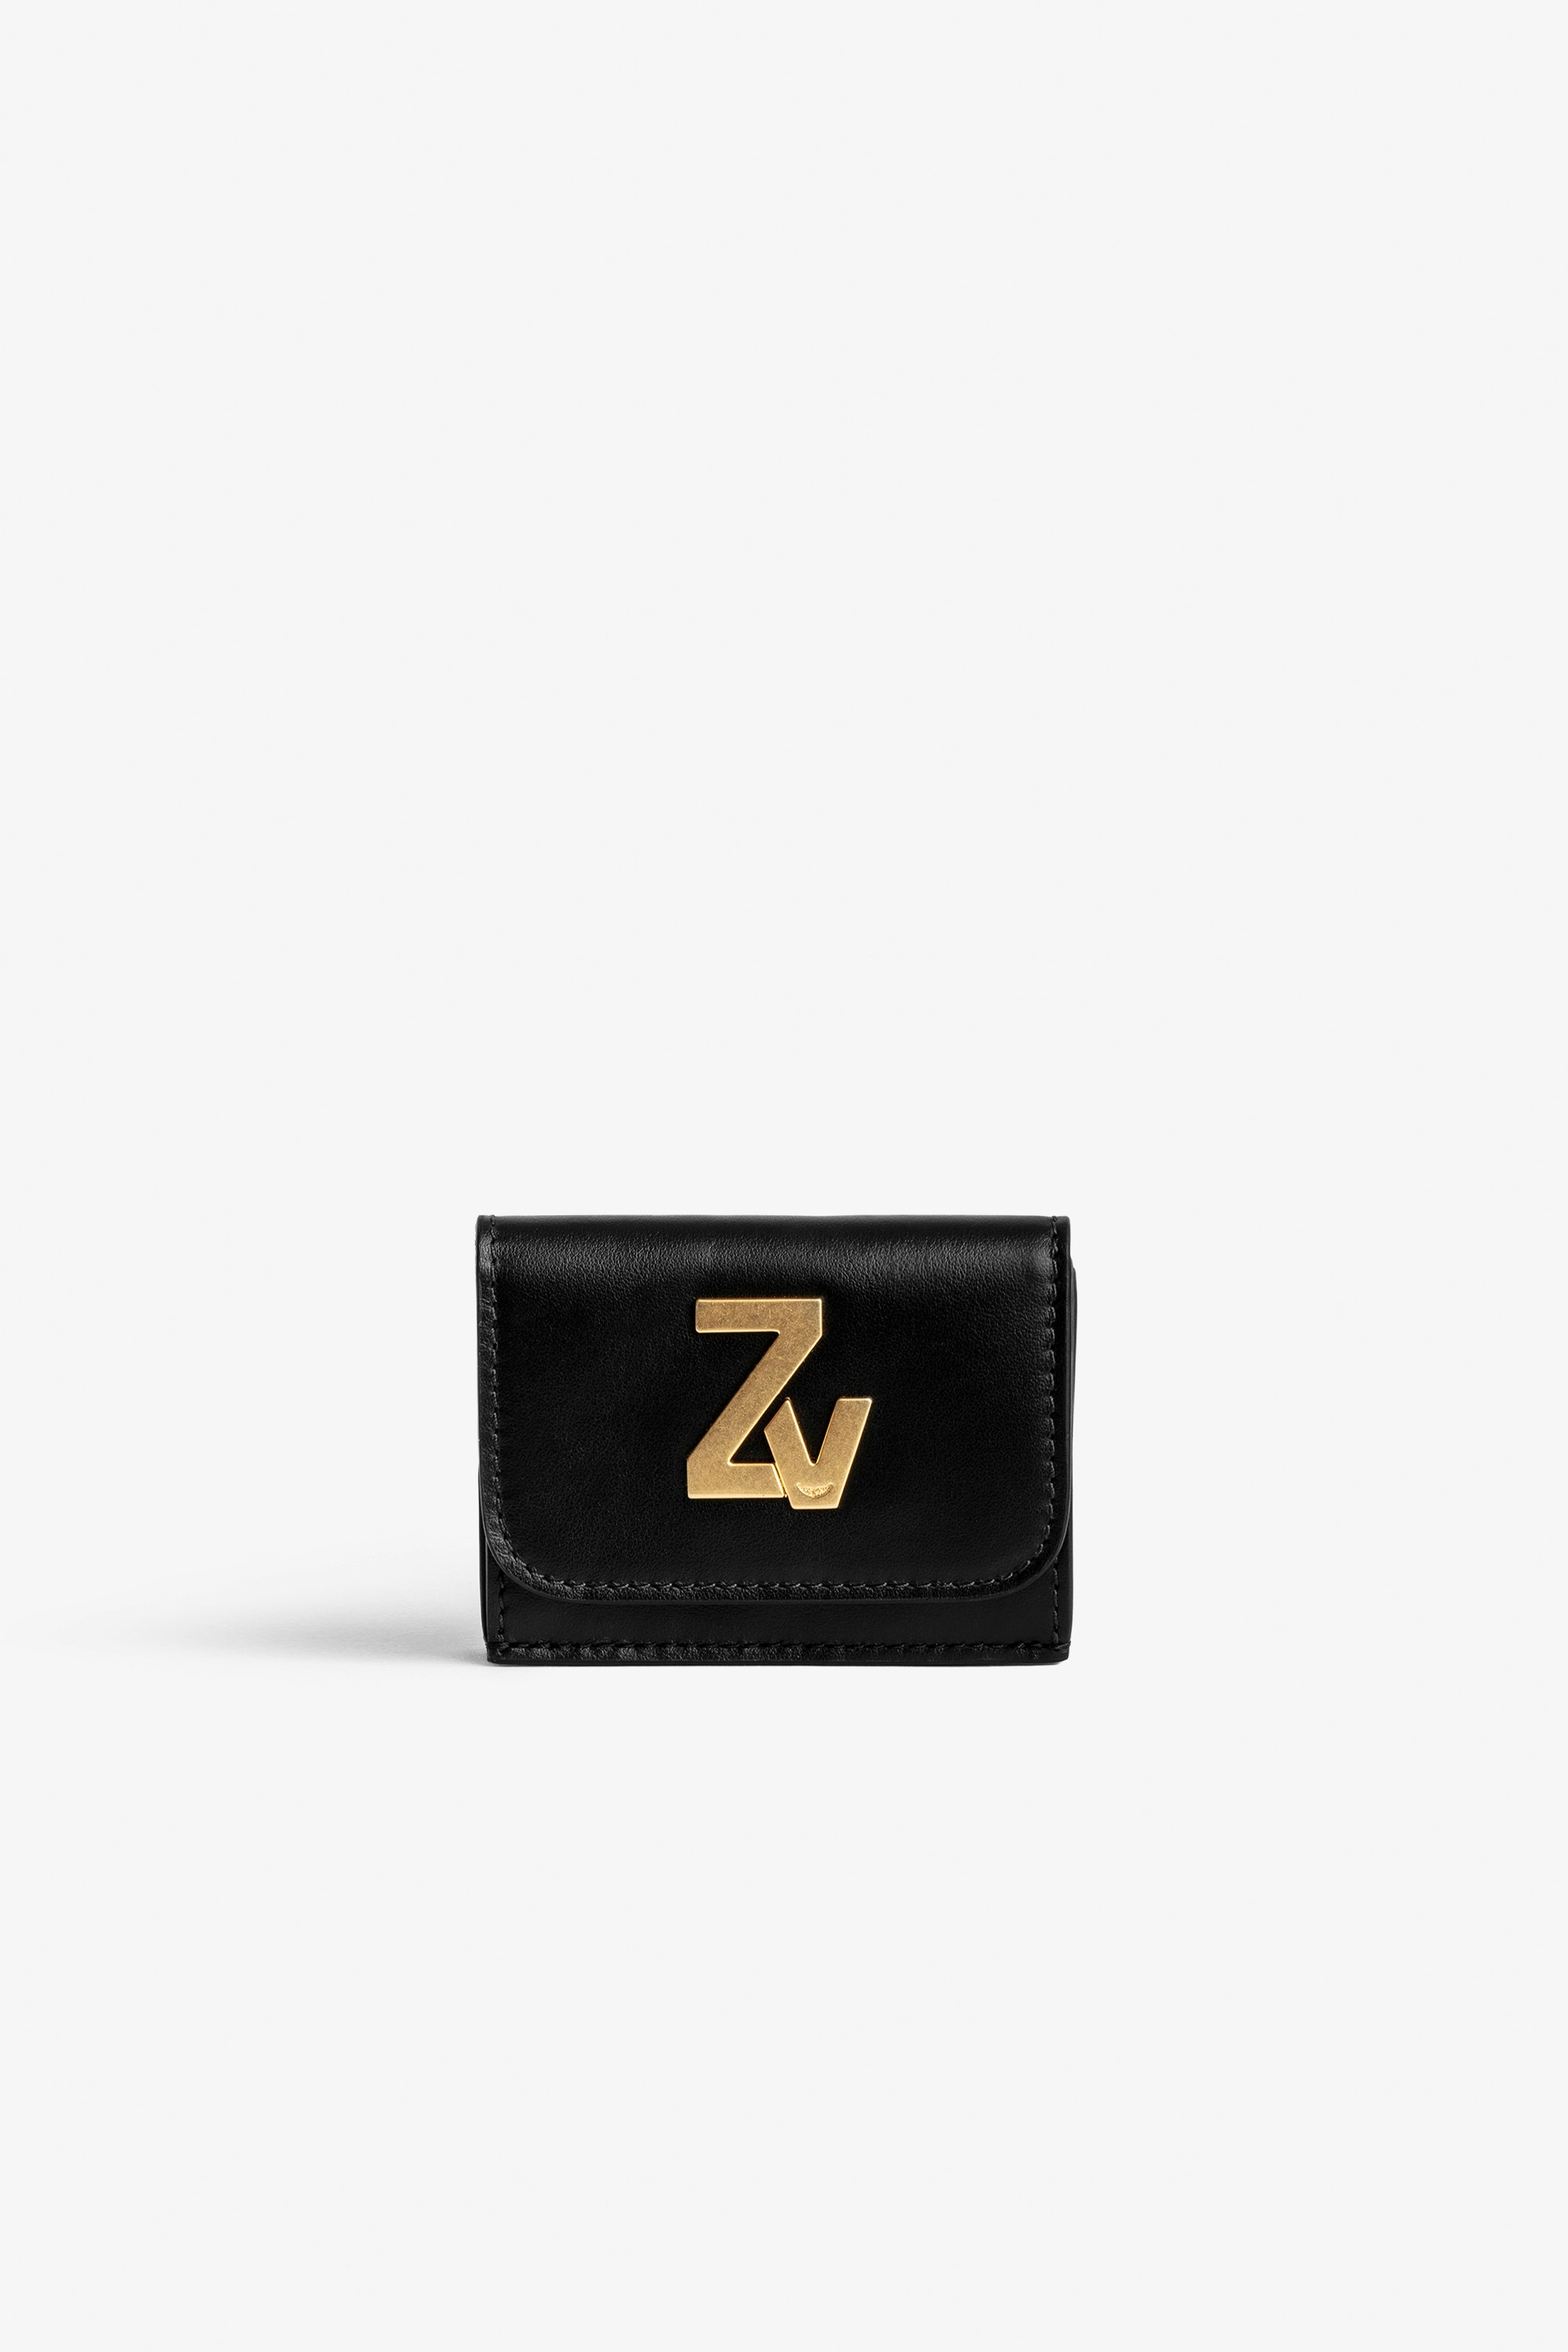 ZV Initiale Le Trifold Wallet Women's small trifold black leather wallet